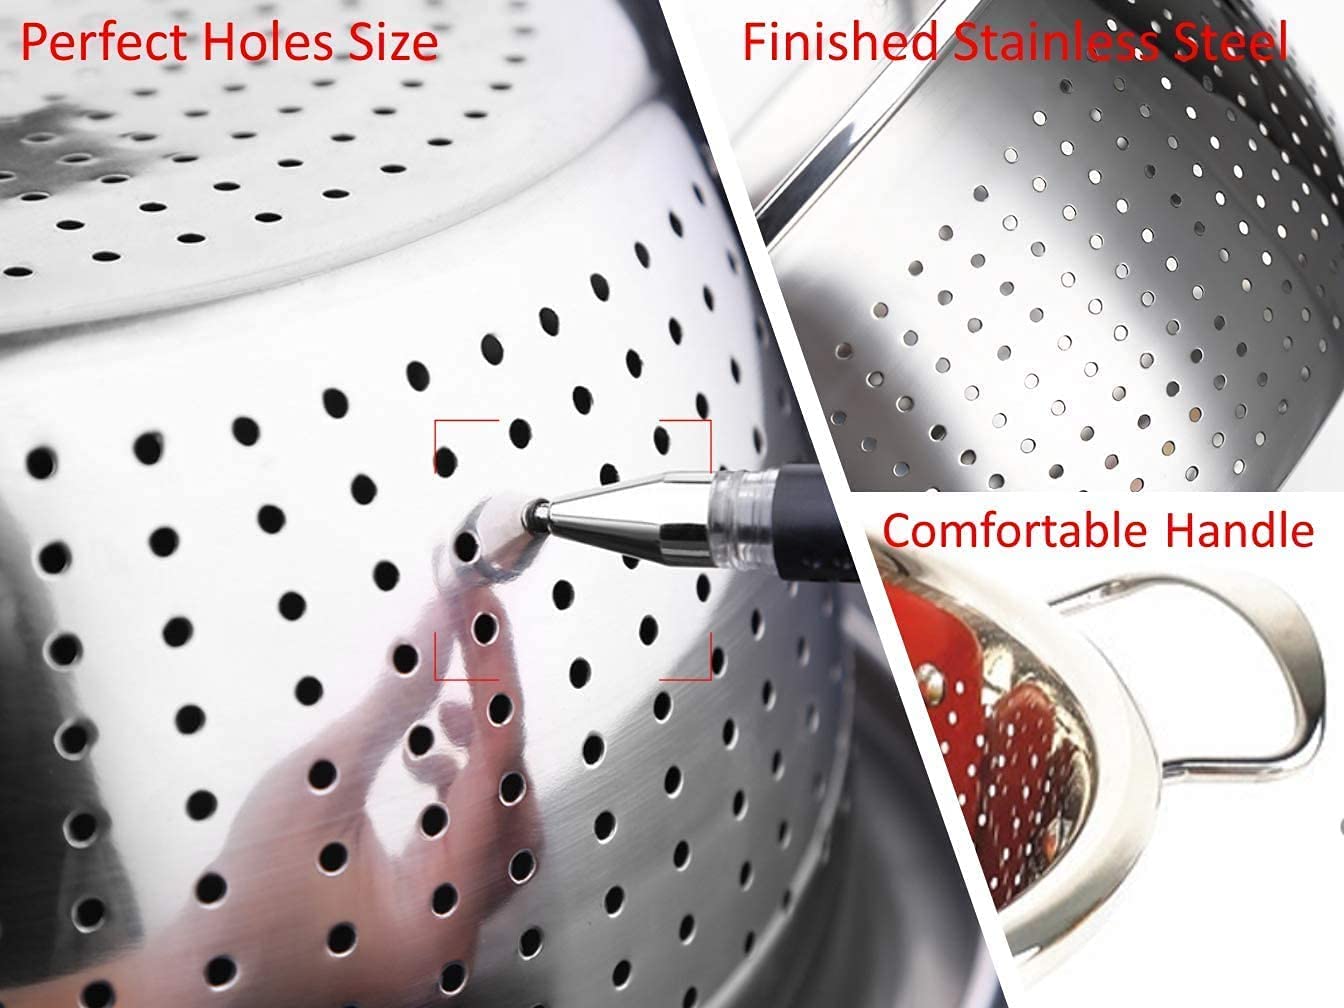 38cm Stainless Steel Tall Colander